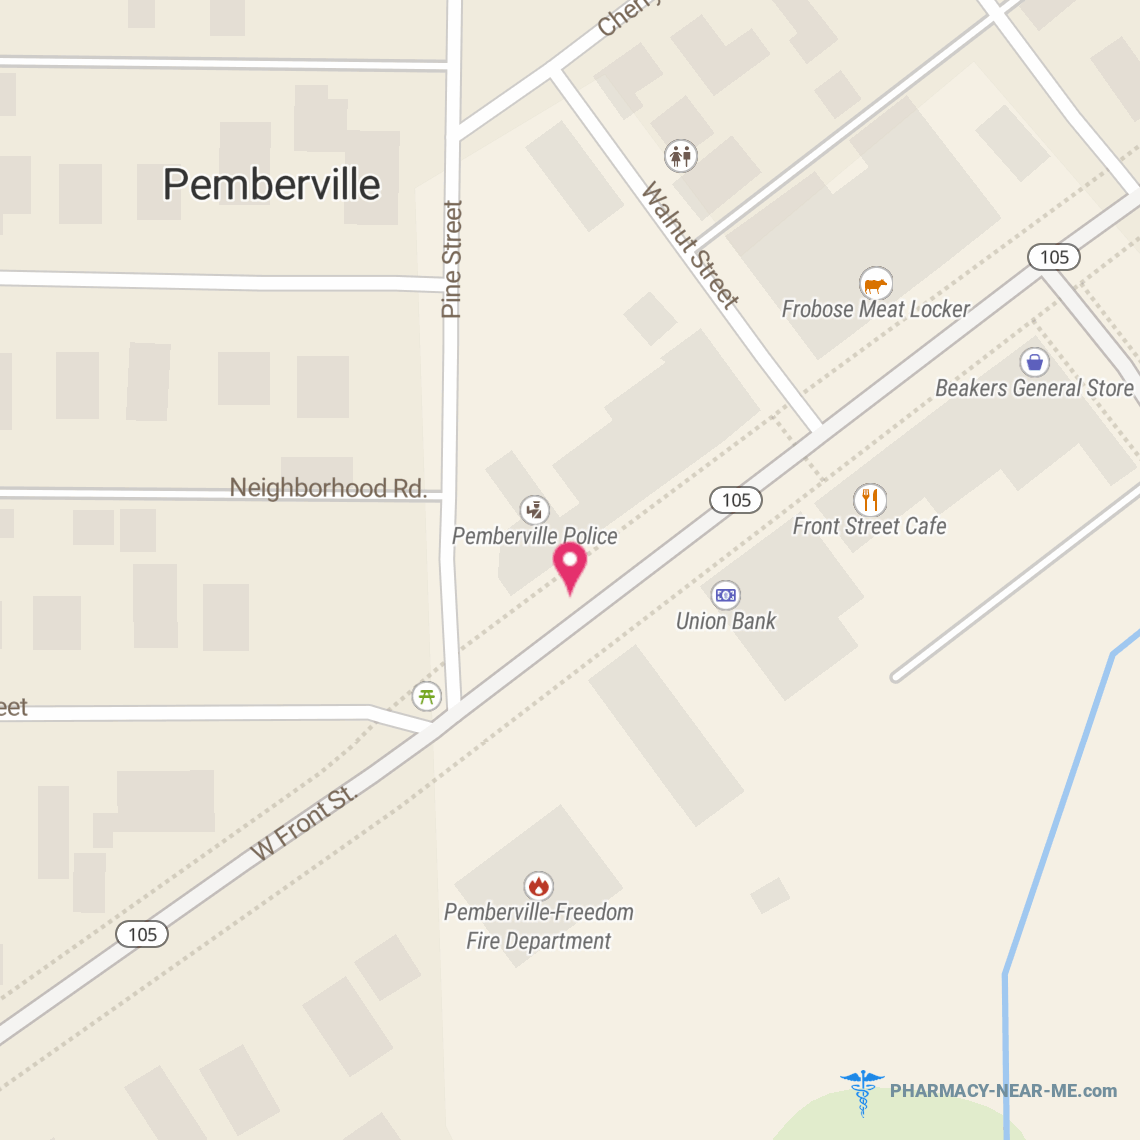 PEMBERVILLE DRUG STORE LLC - Pharmacy Hours, Phone, Reviews & Information: 139 East Front Street, Pemberville, Ohio 43450, United States